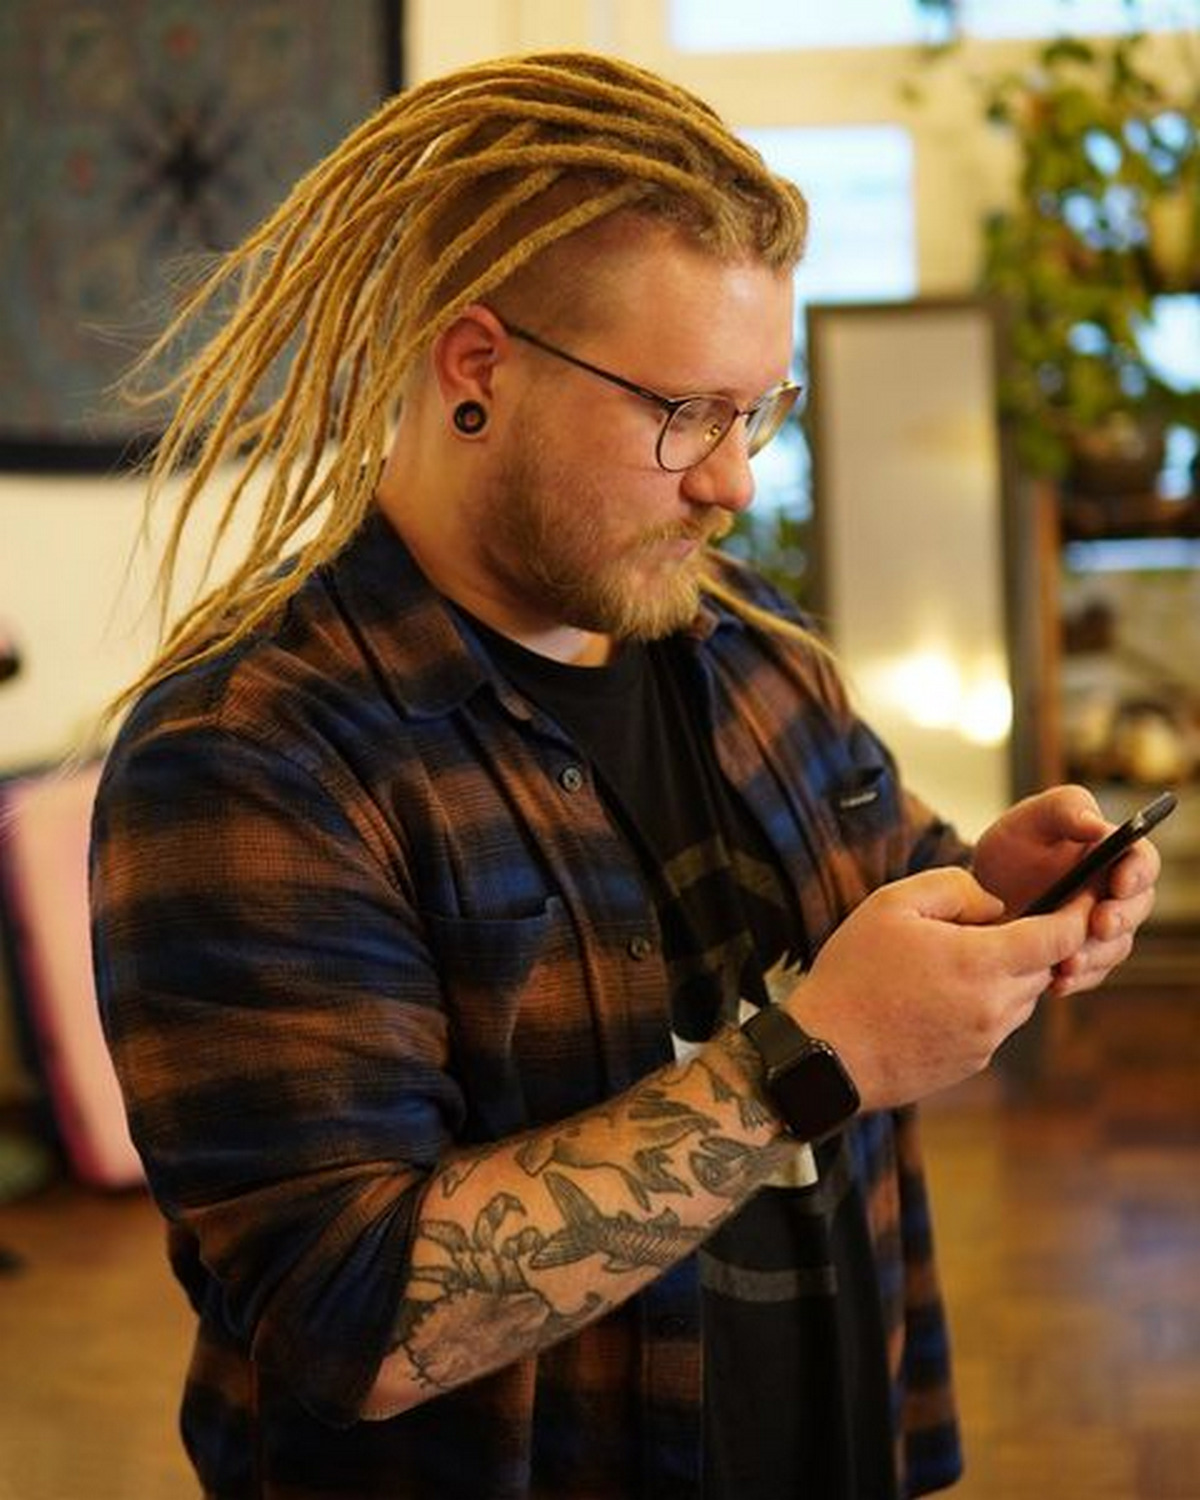  Taper Fade Dreads with Blonde